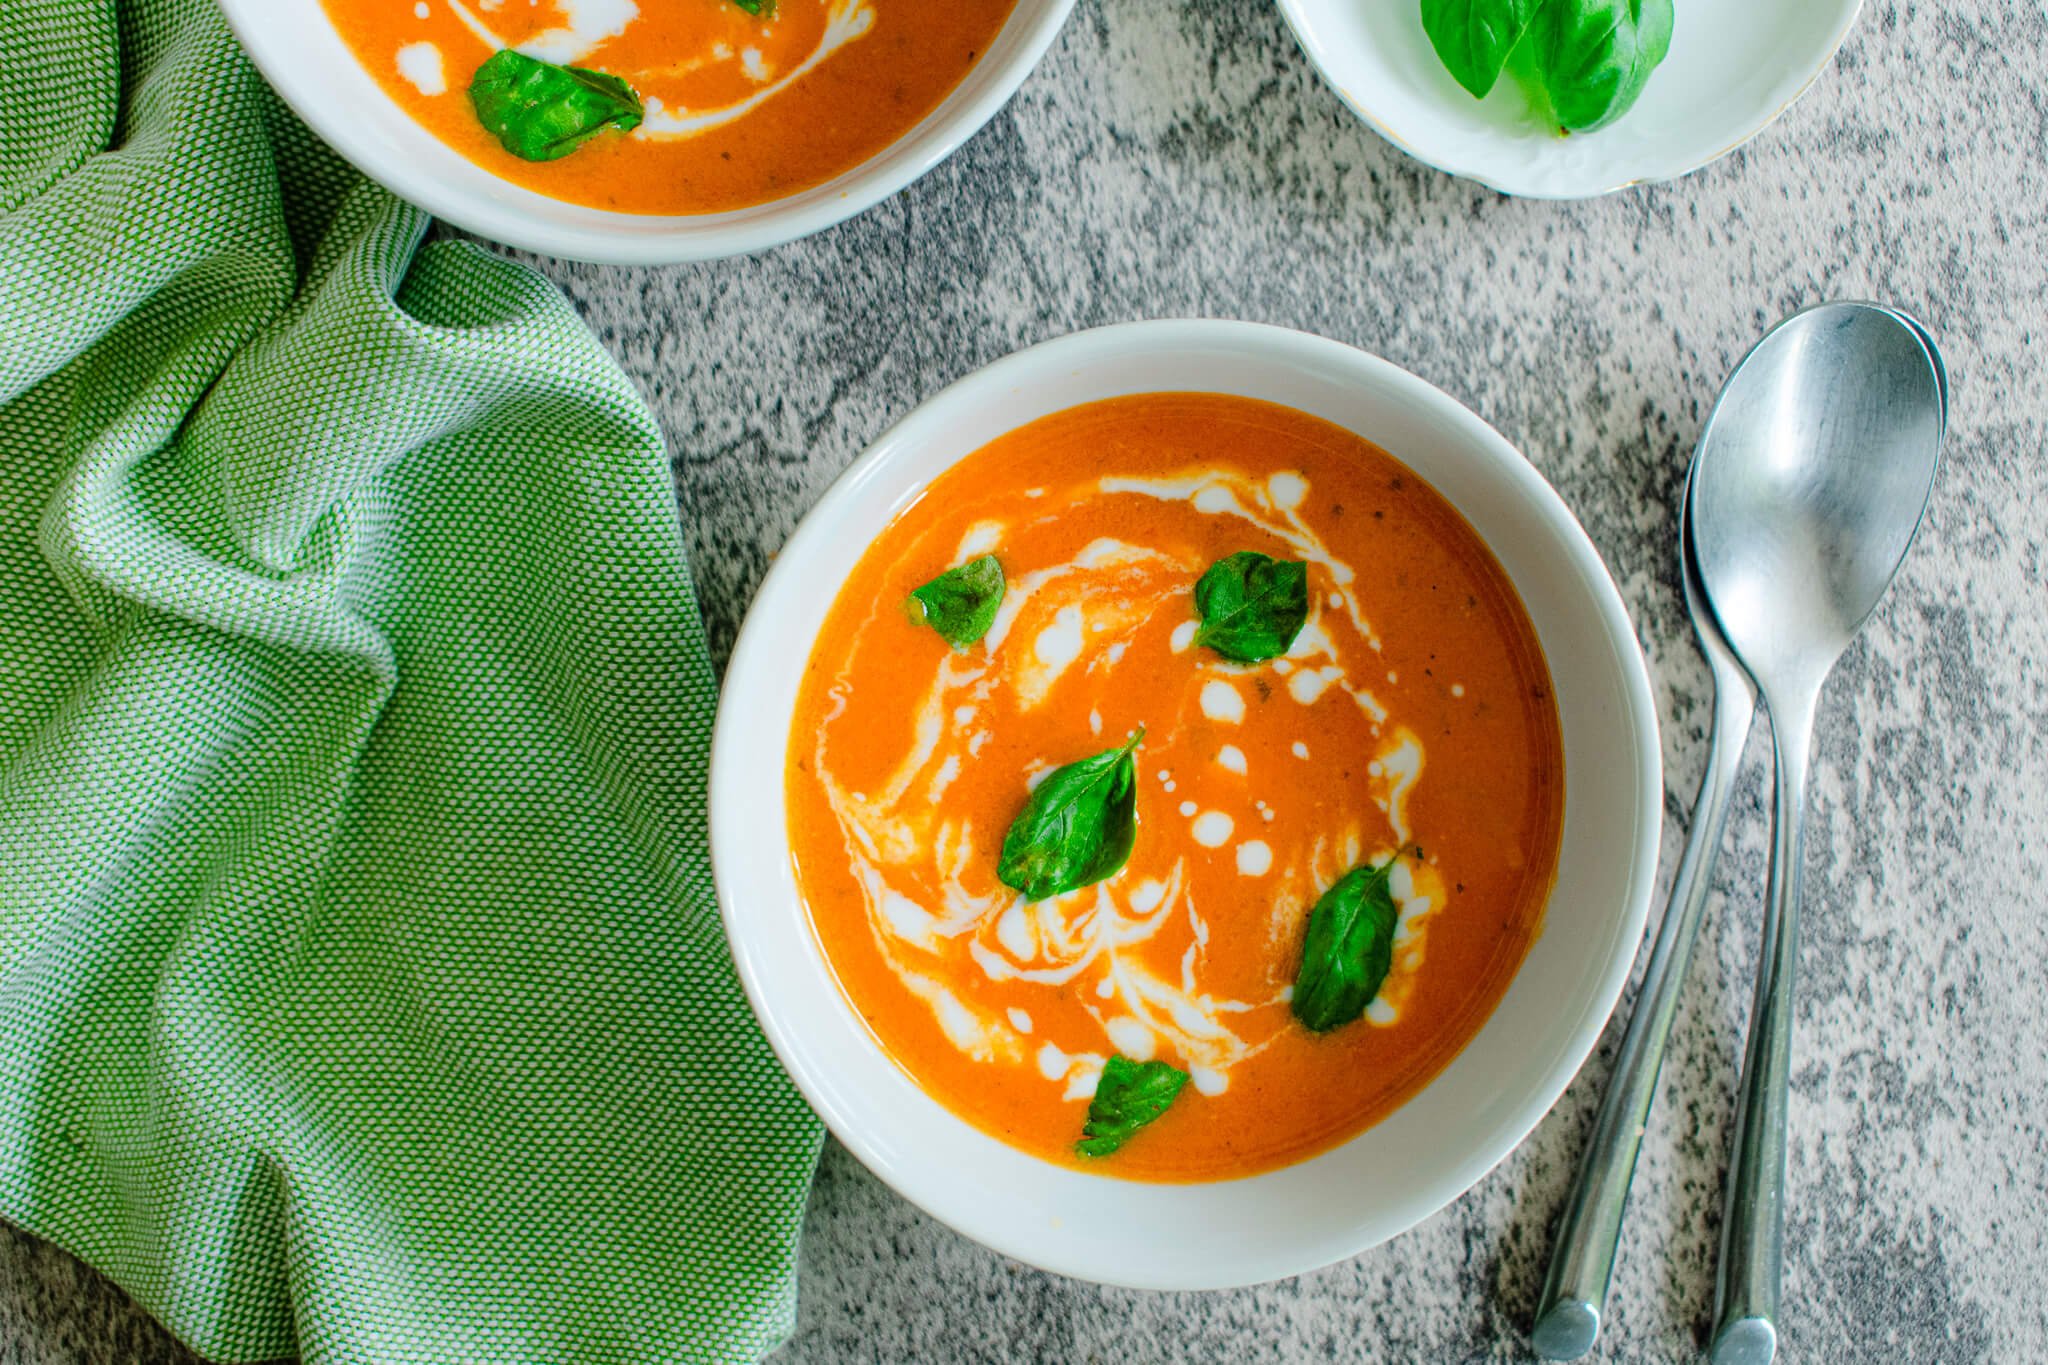 dairy-free tomato soup with coconut milk drizzle